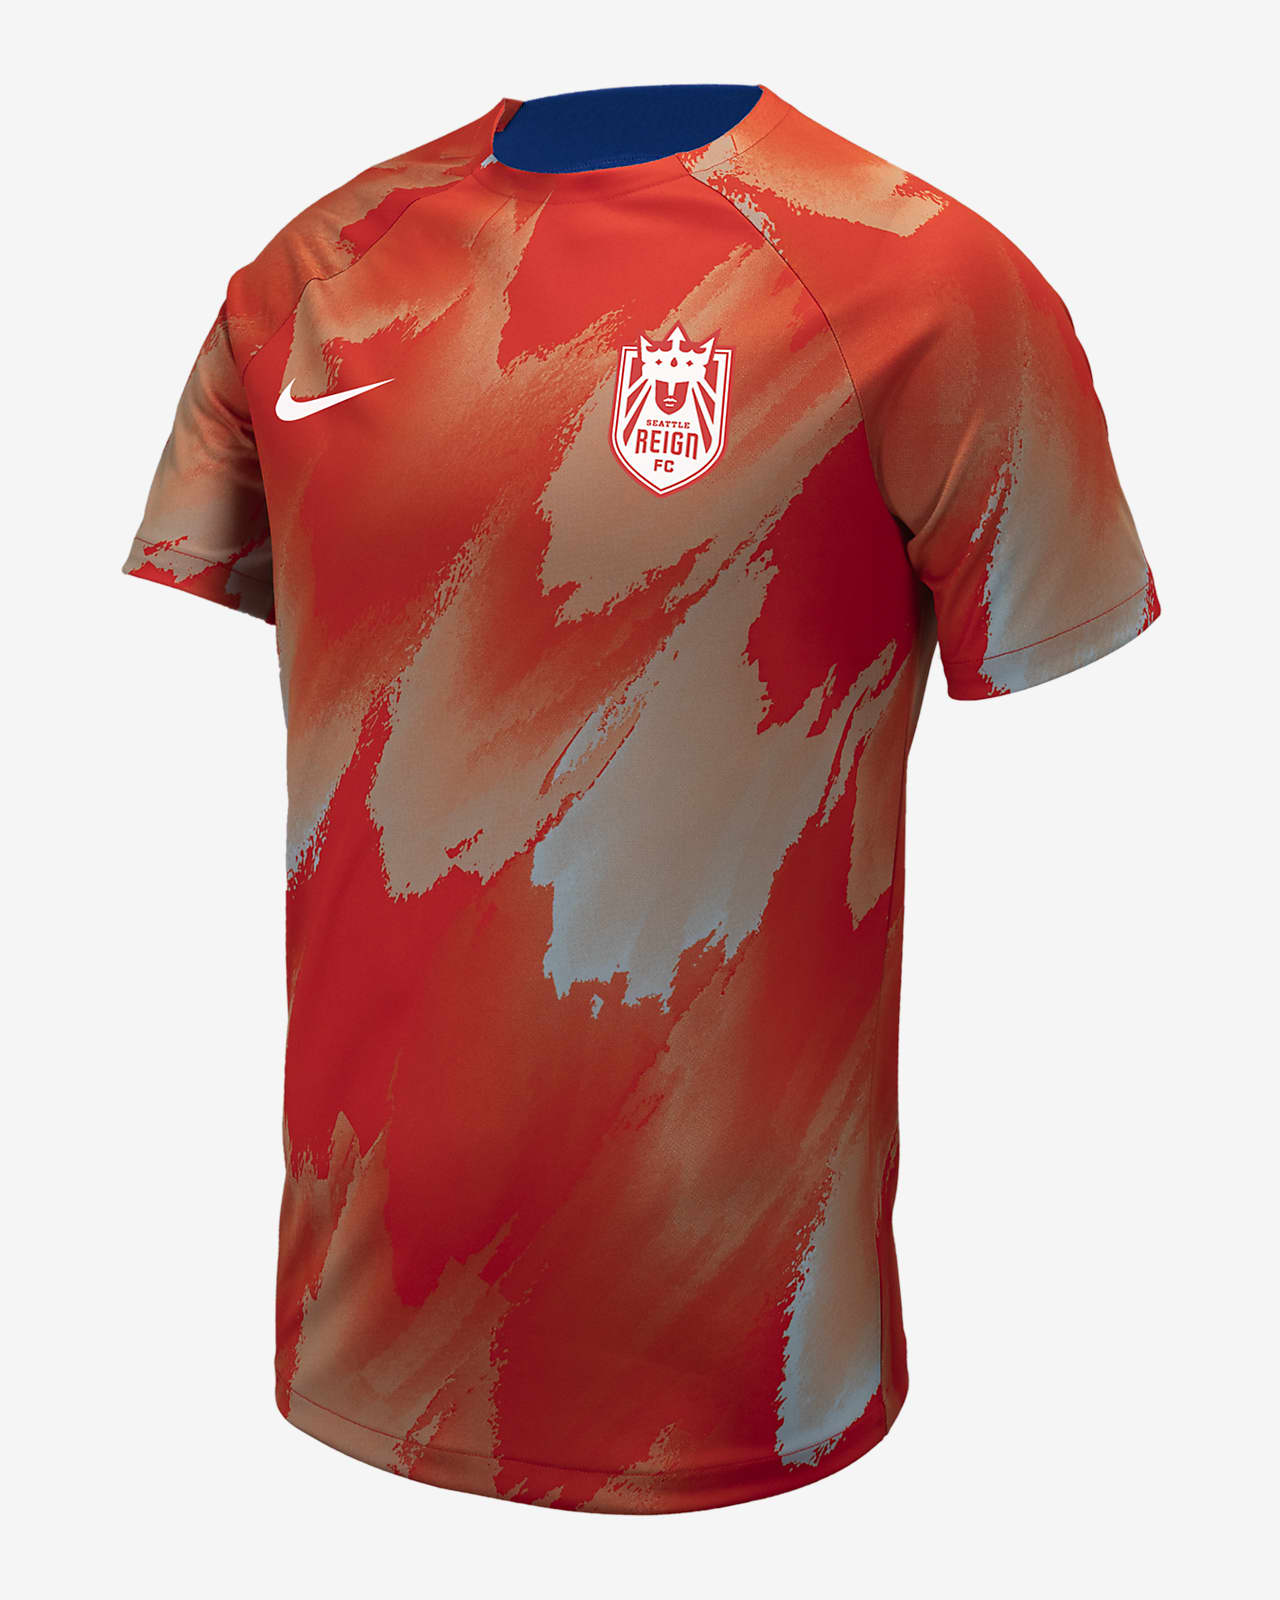 Seattle Reign Men's Nike NWSL Pre-Match Top